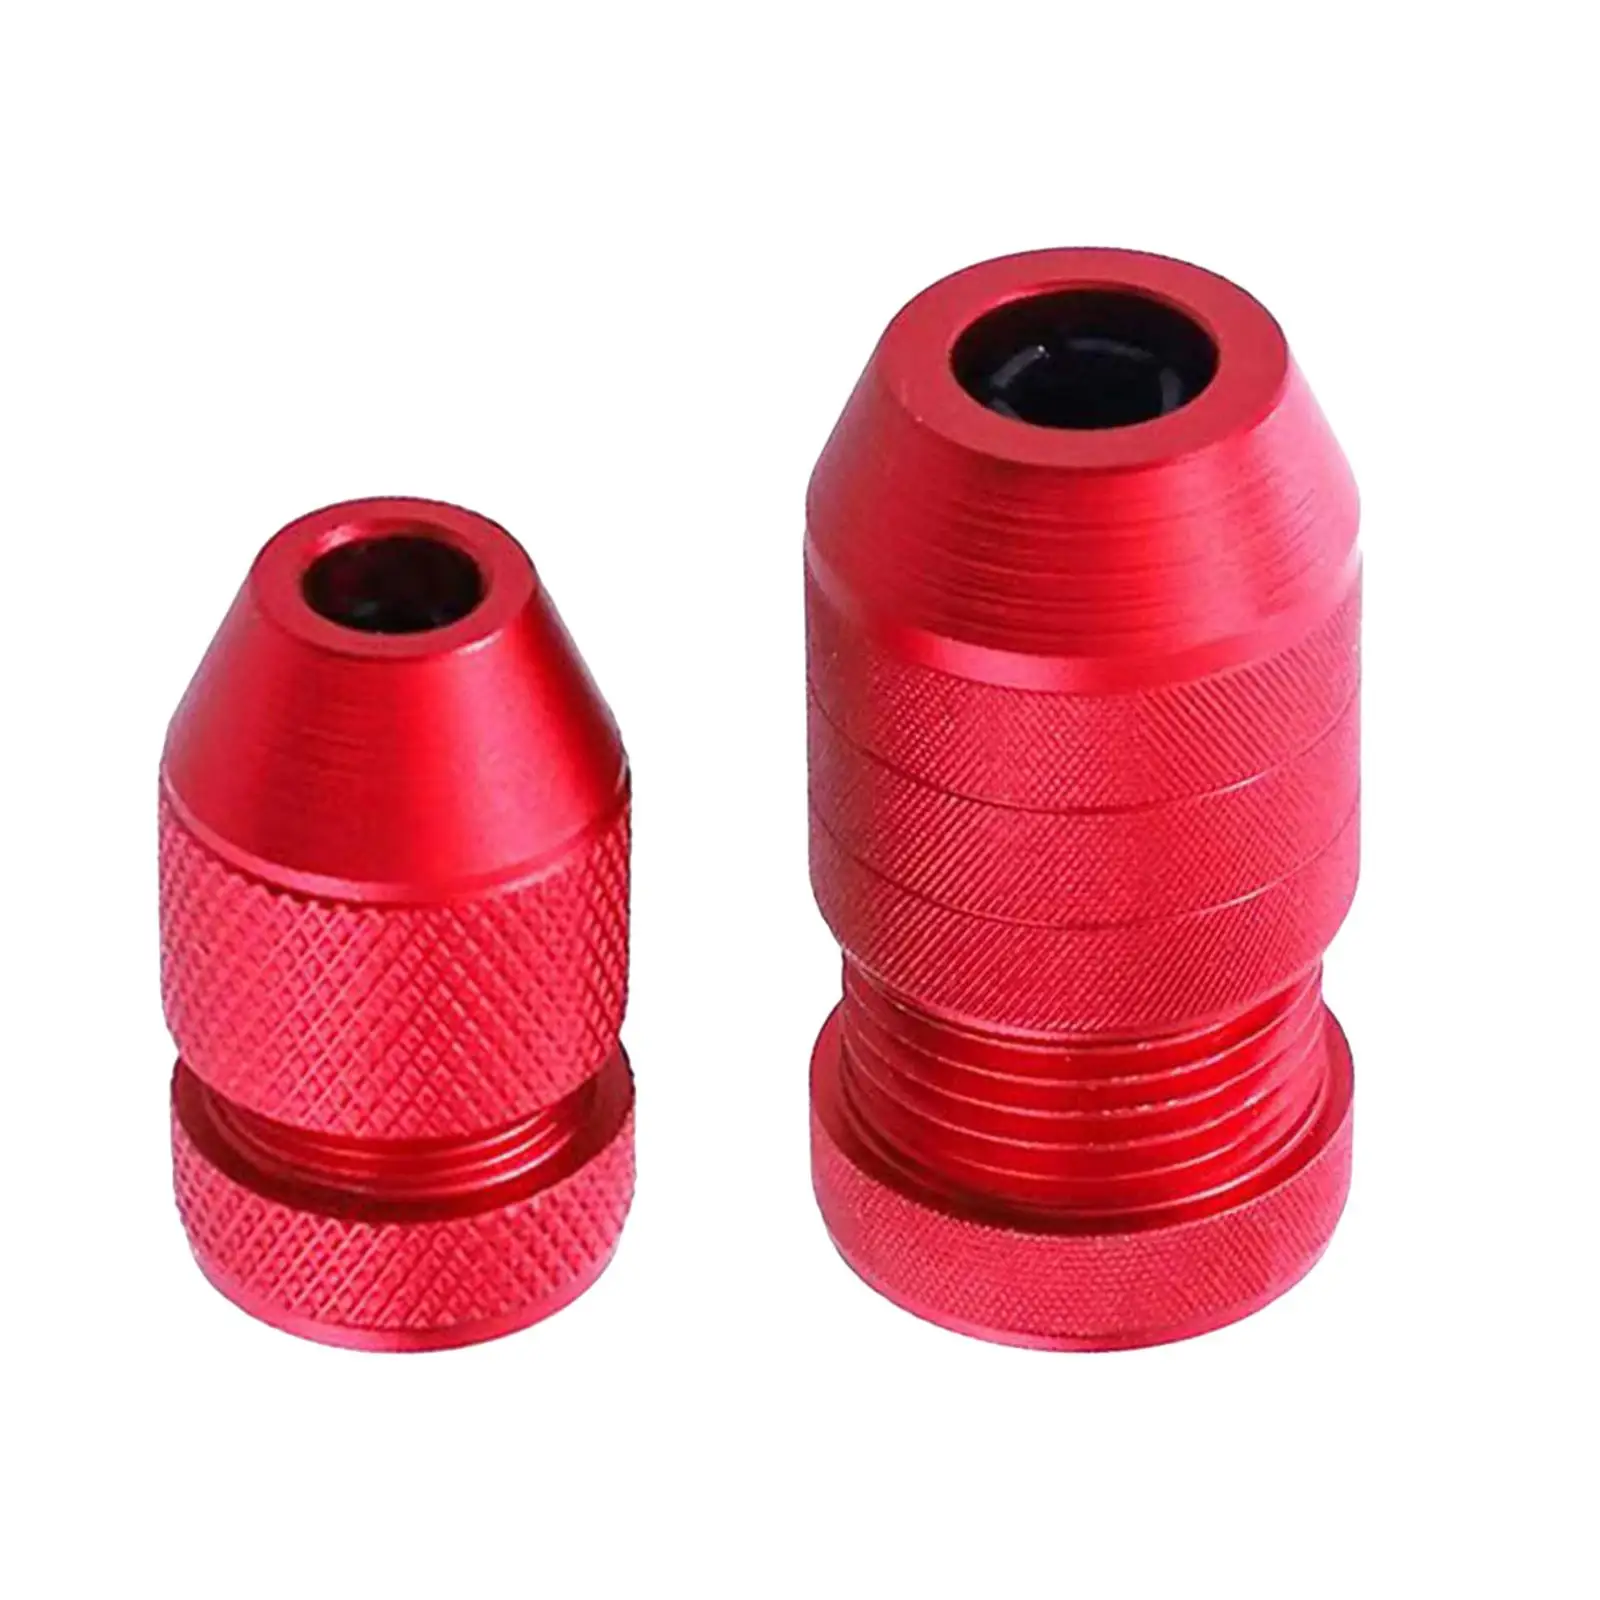 

Aluminum Alloy Depth Stopper Consistent Drilling Hand Tools Precise Control Drill Tool Drill Stop Collar for Woodworking